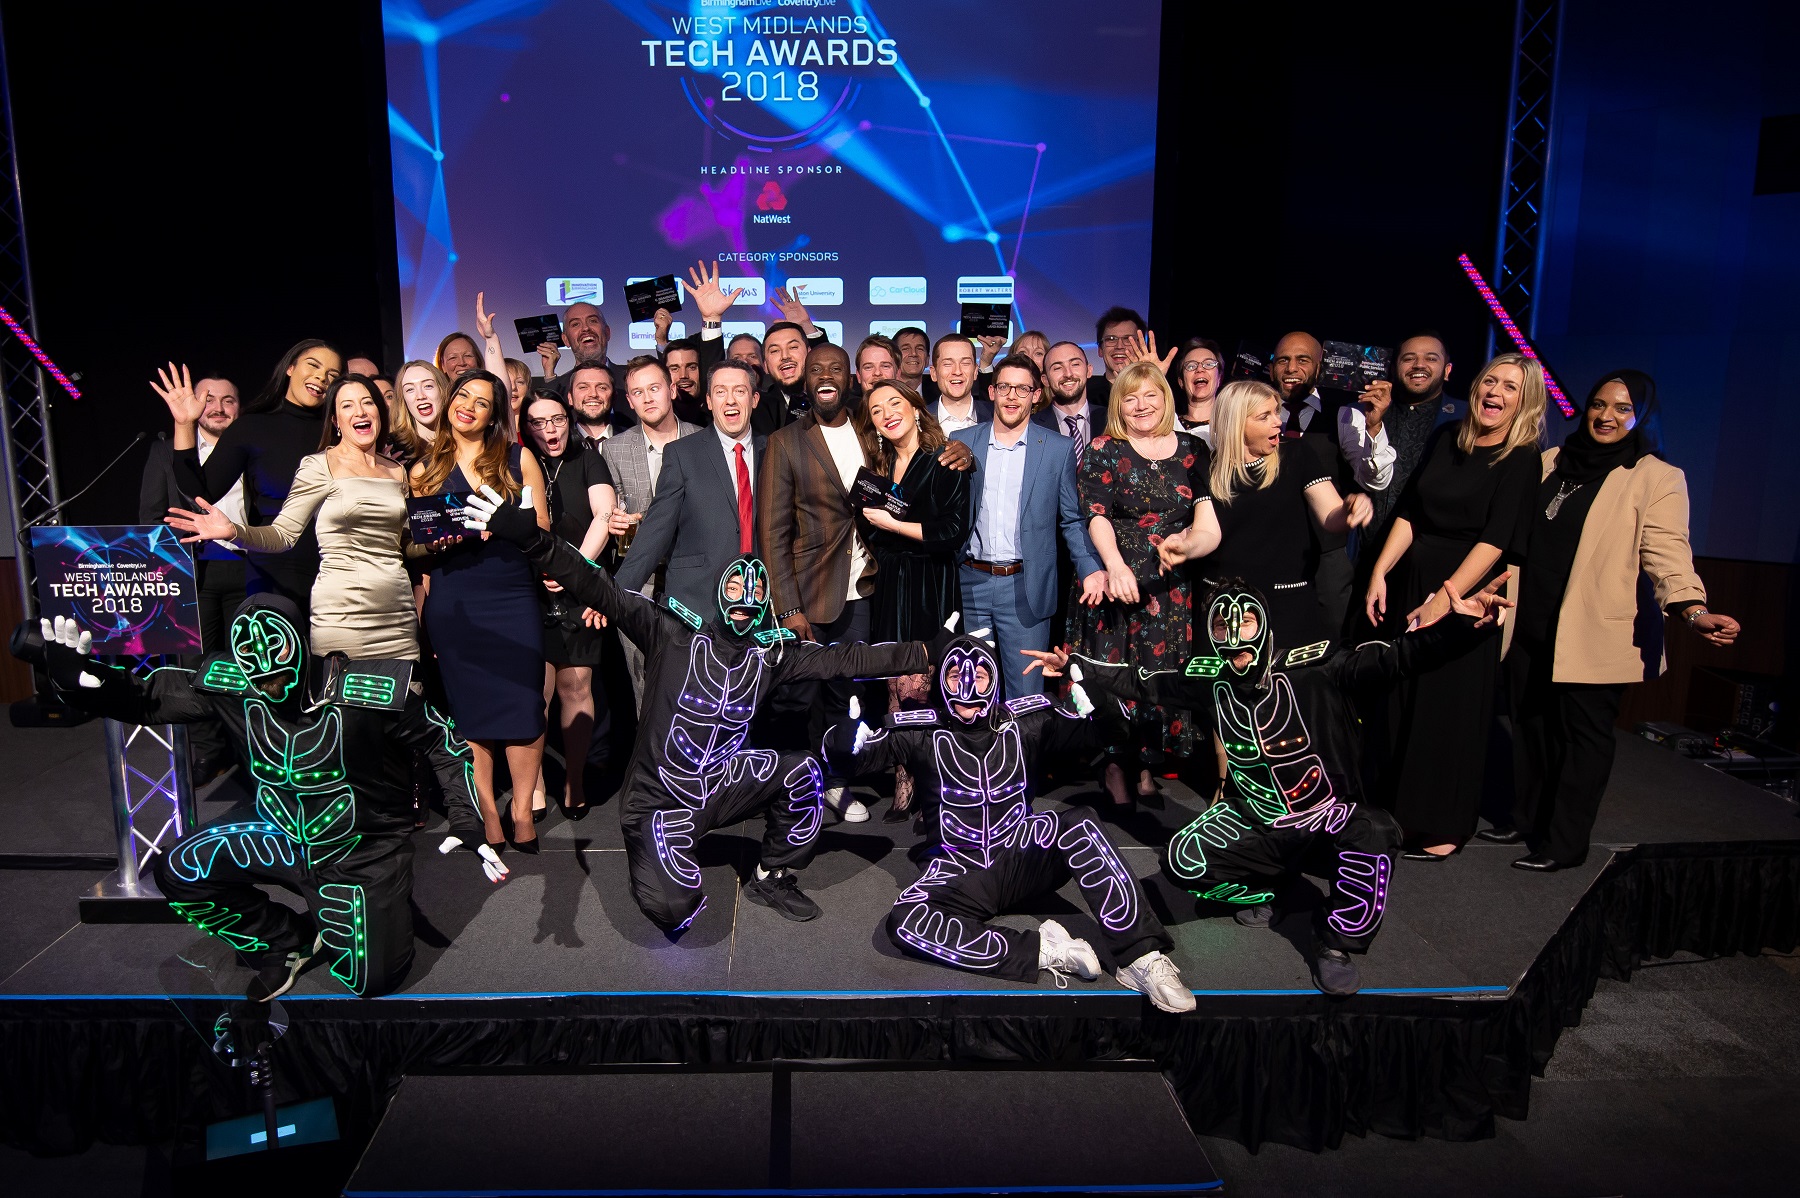 Silicon Canal Tech Awards shortlist announced for 2019